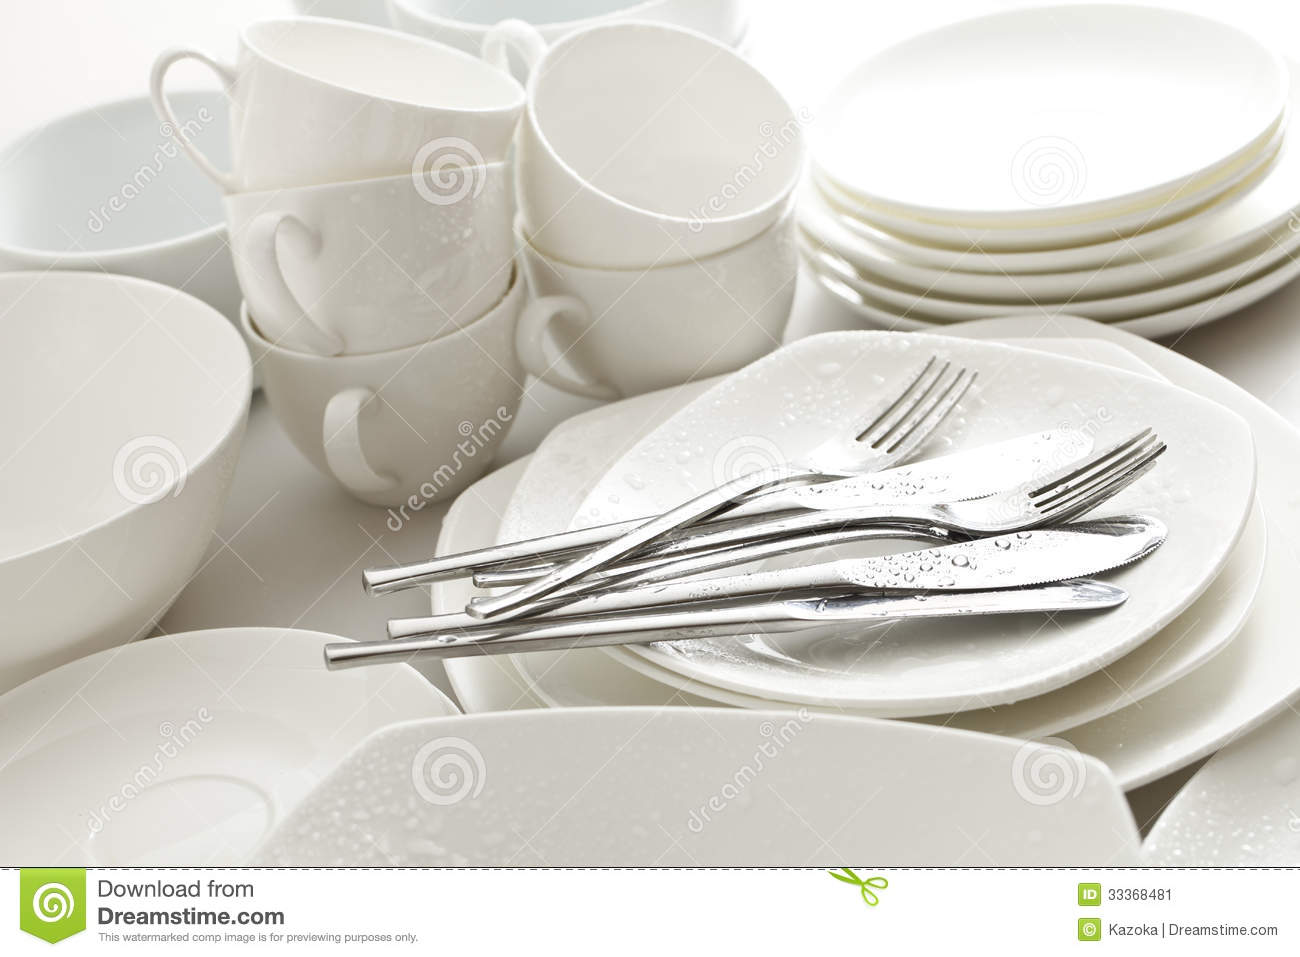 Image Of Kitchen Cutlery And Dishes Piled